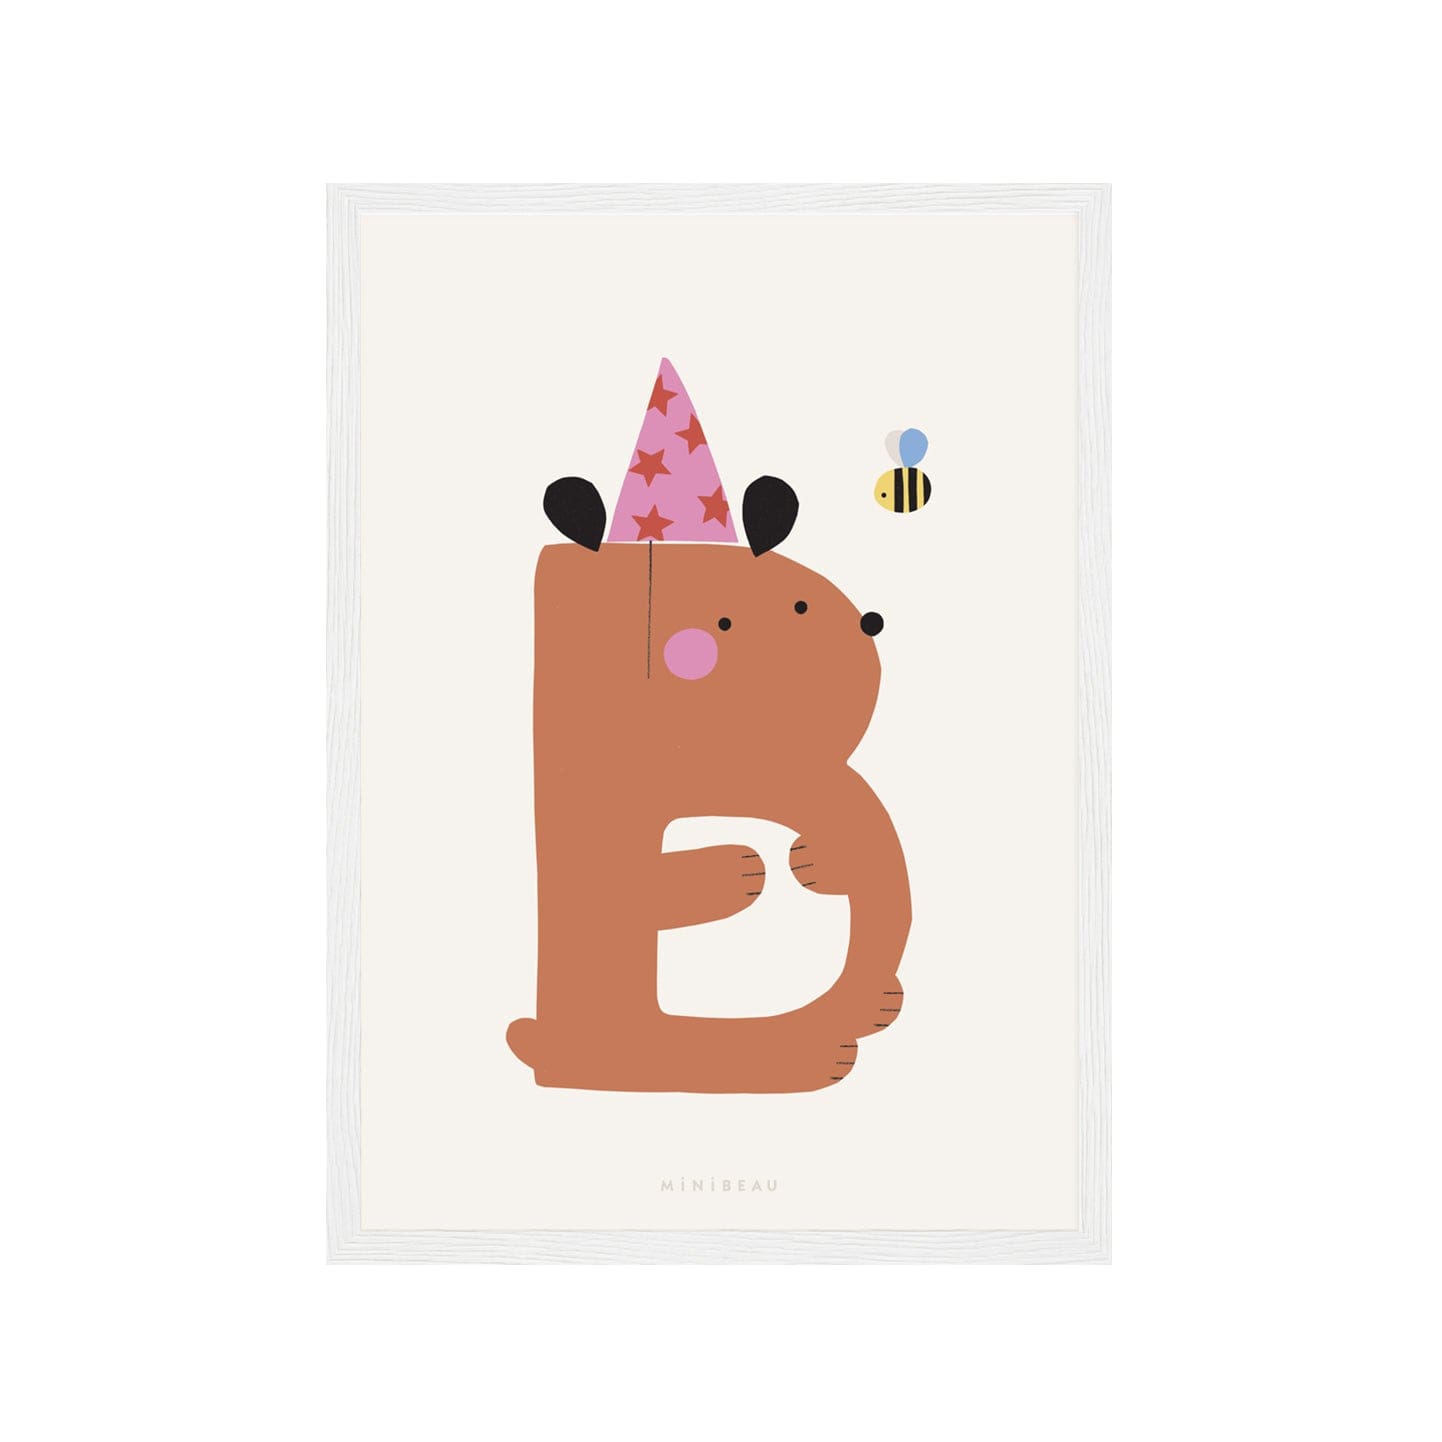 Art print in a white frame. Our Happy Alphabet 'B' Art Print shows a brown bear with a white tummy in the shape of a B in a pink party hat with red stars on, with a bee buzzing around it's head. On a neutral background.